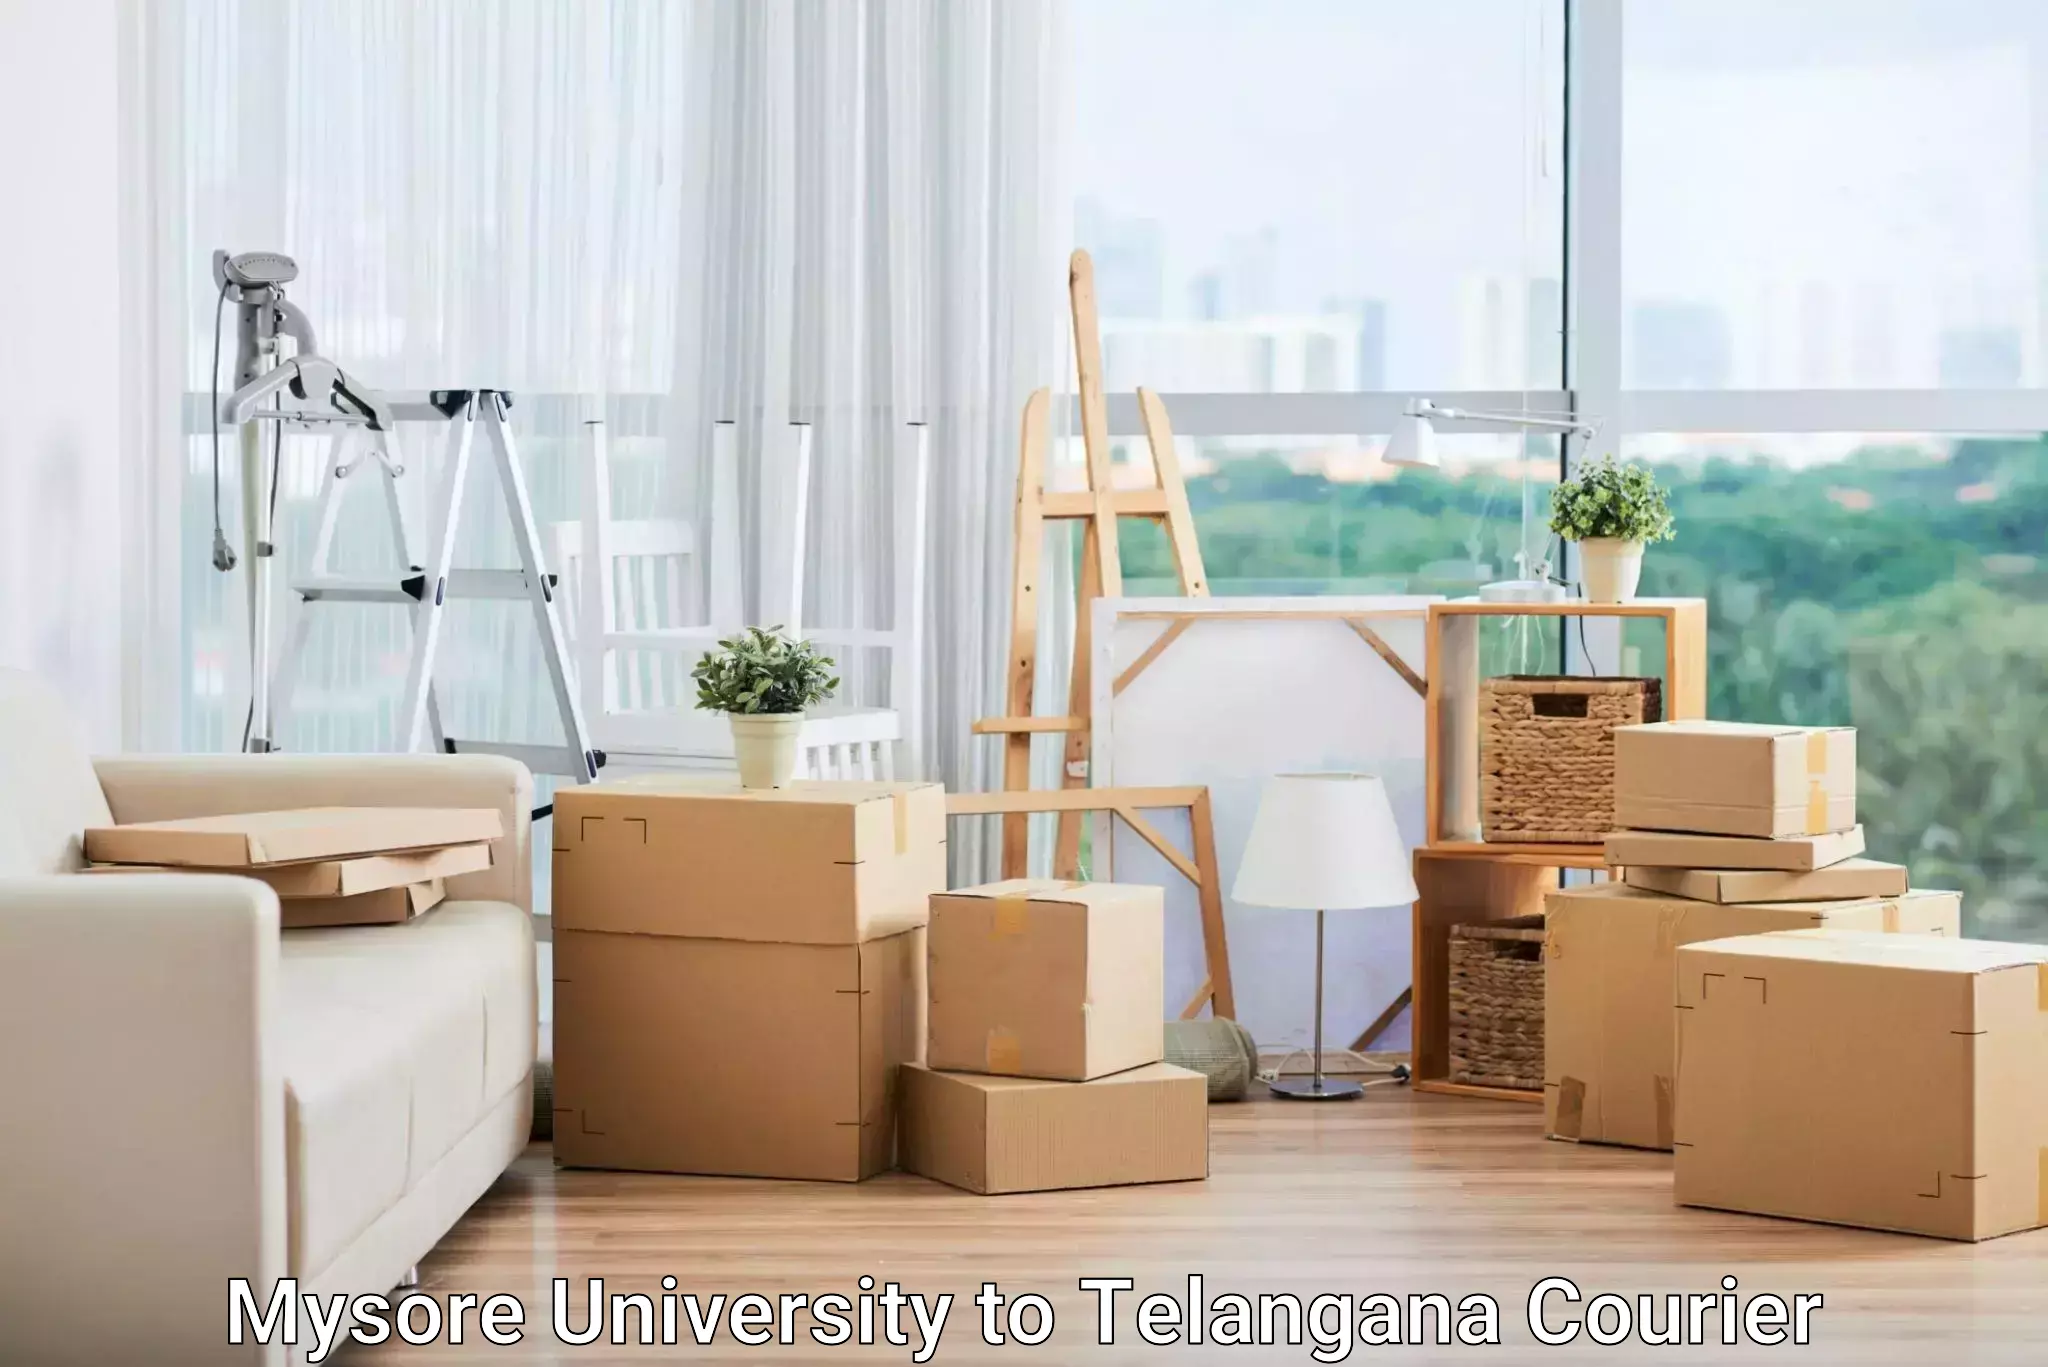 Cost-effective courier solutions Mysore University to Telangana